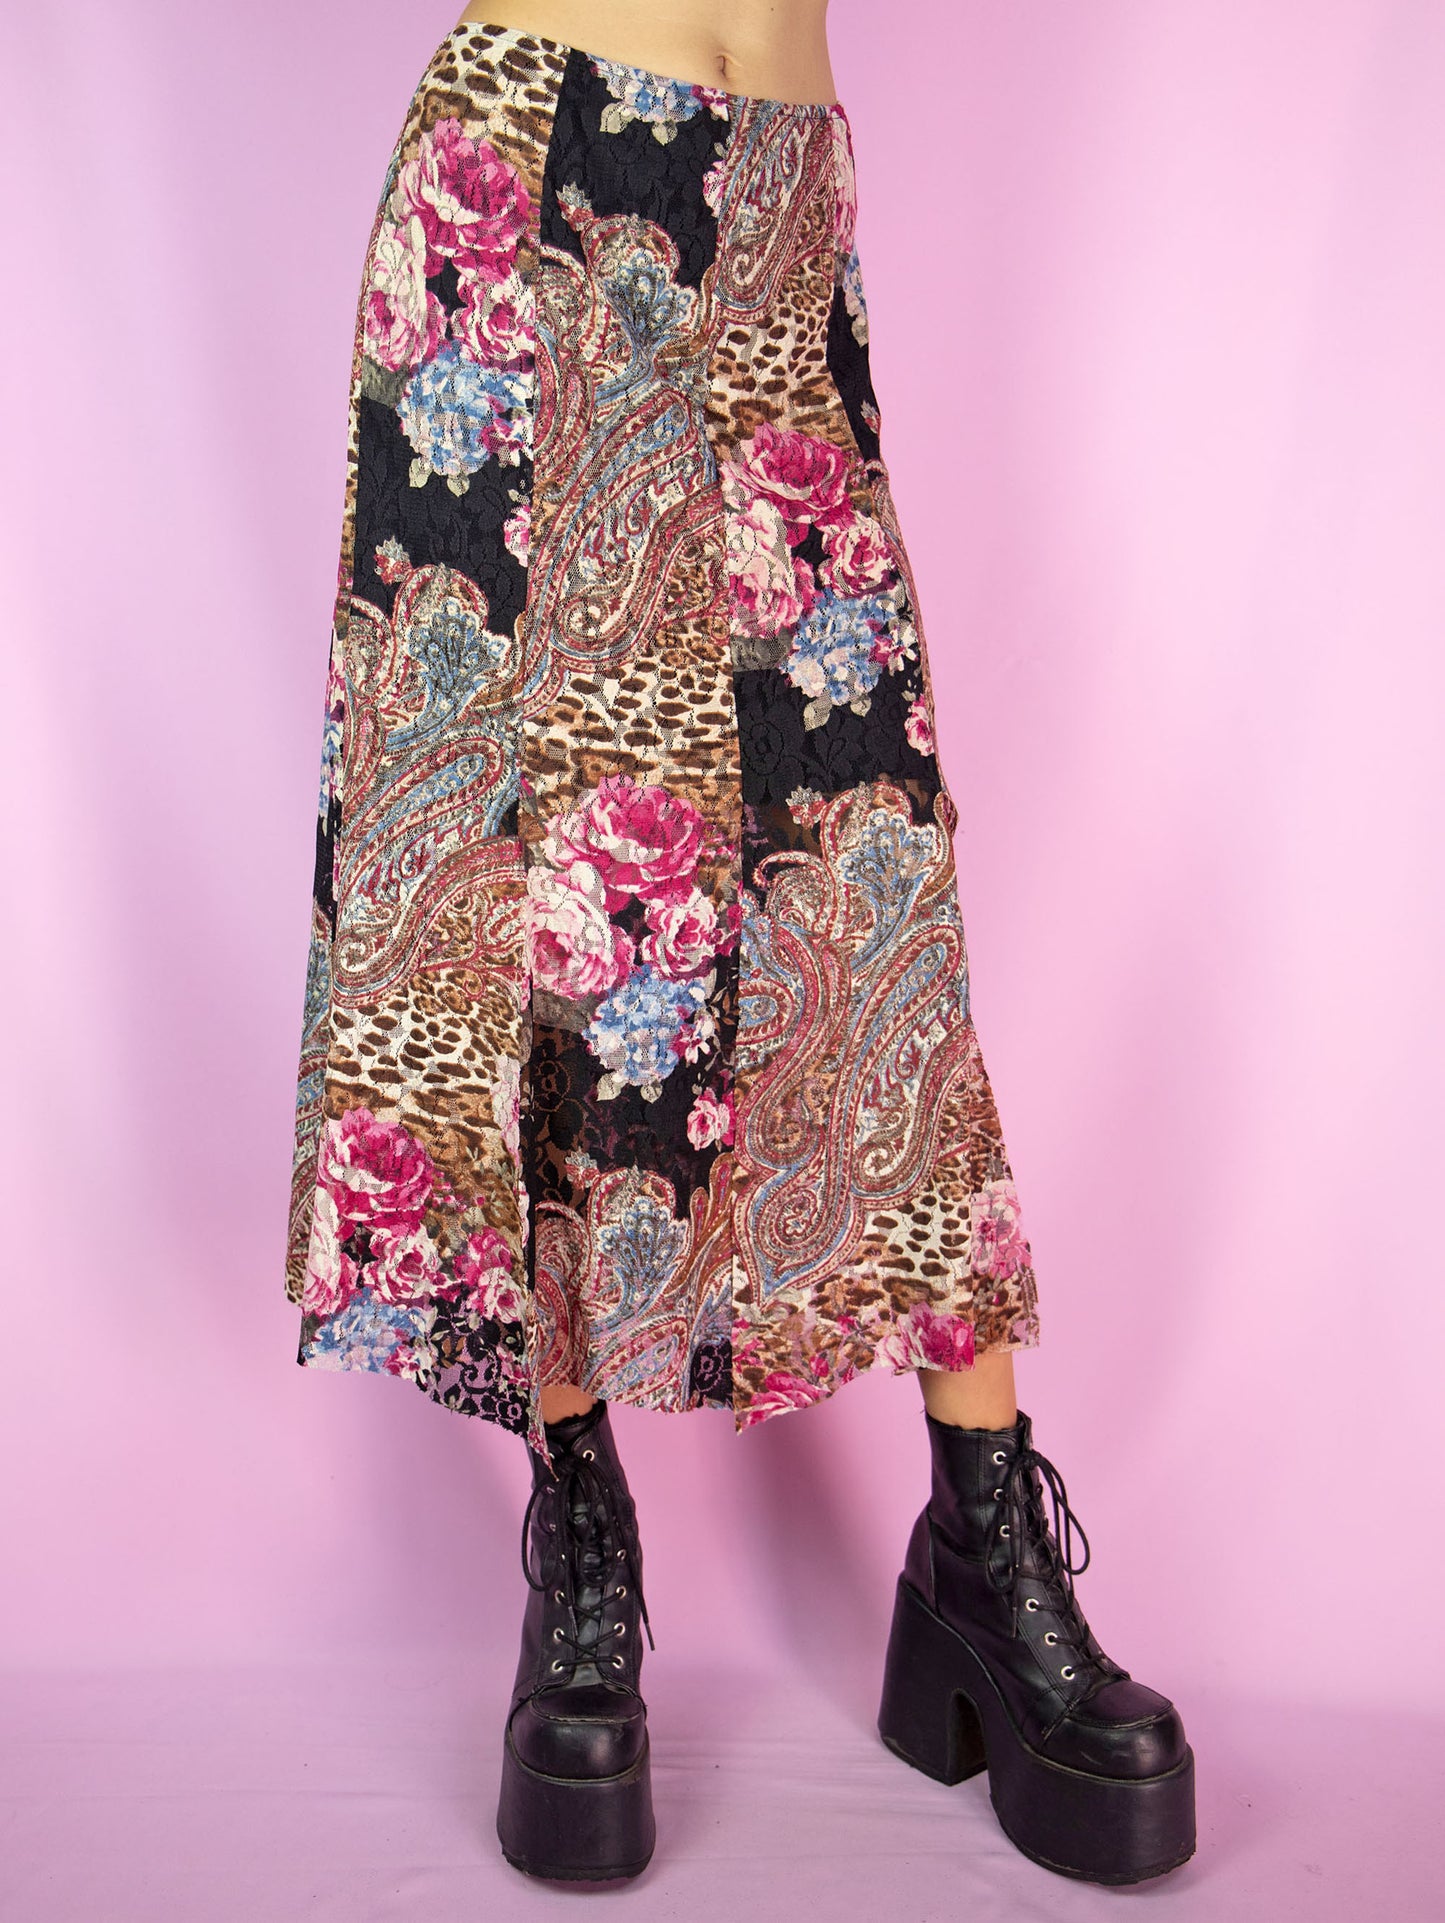 The Y2K Boho Lace Midi Skirt is a vintage floral abstract paisley animal print pattern mesh skirt with a spliced hem and an elasticated waist. Avant garde fairy grunge 2000s summer maxi skirt.